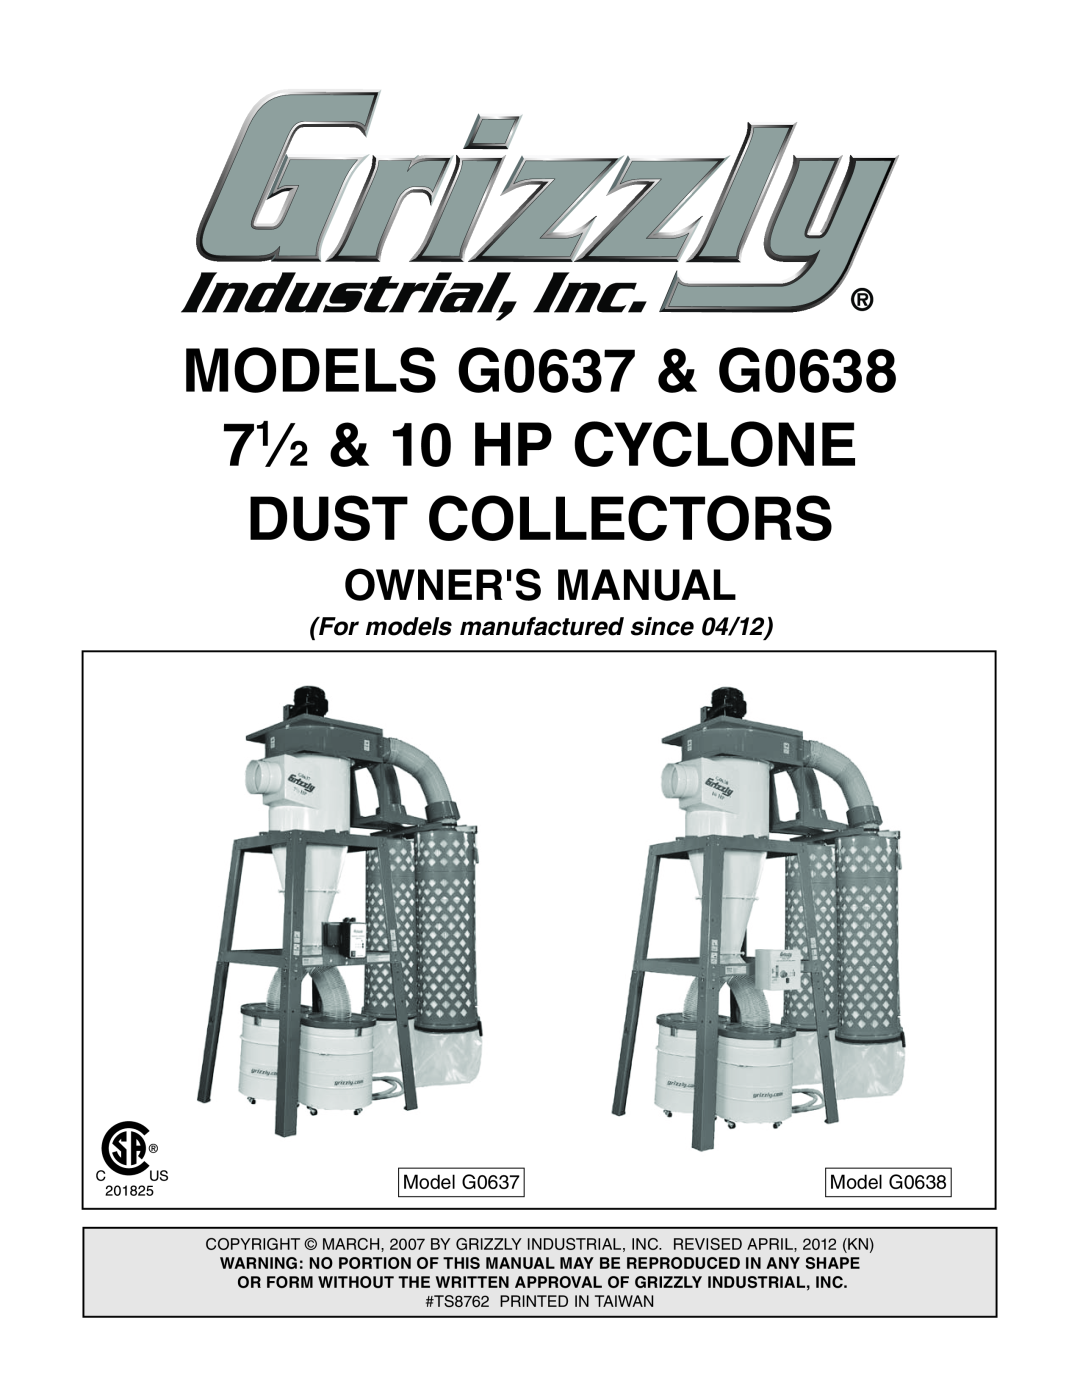 Grizzly owner manual Owners Manual, MODEL G0637/G0638 71/2 & 10 HP CYCLONE DUST, Collectors, Model G0638 